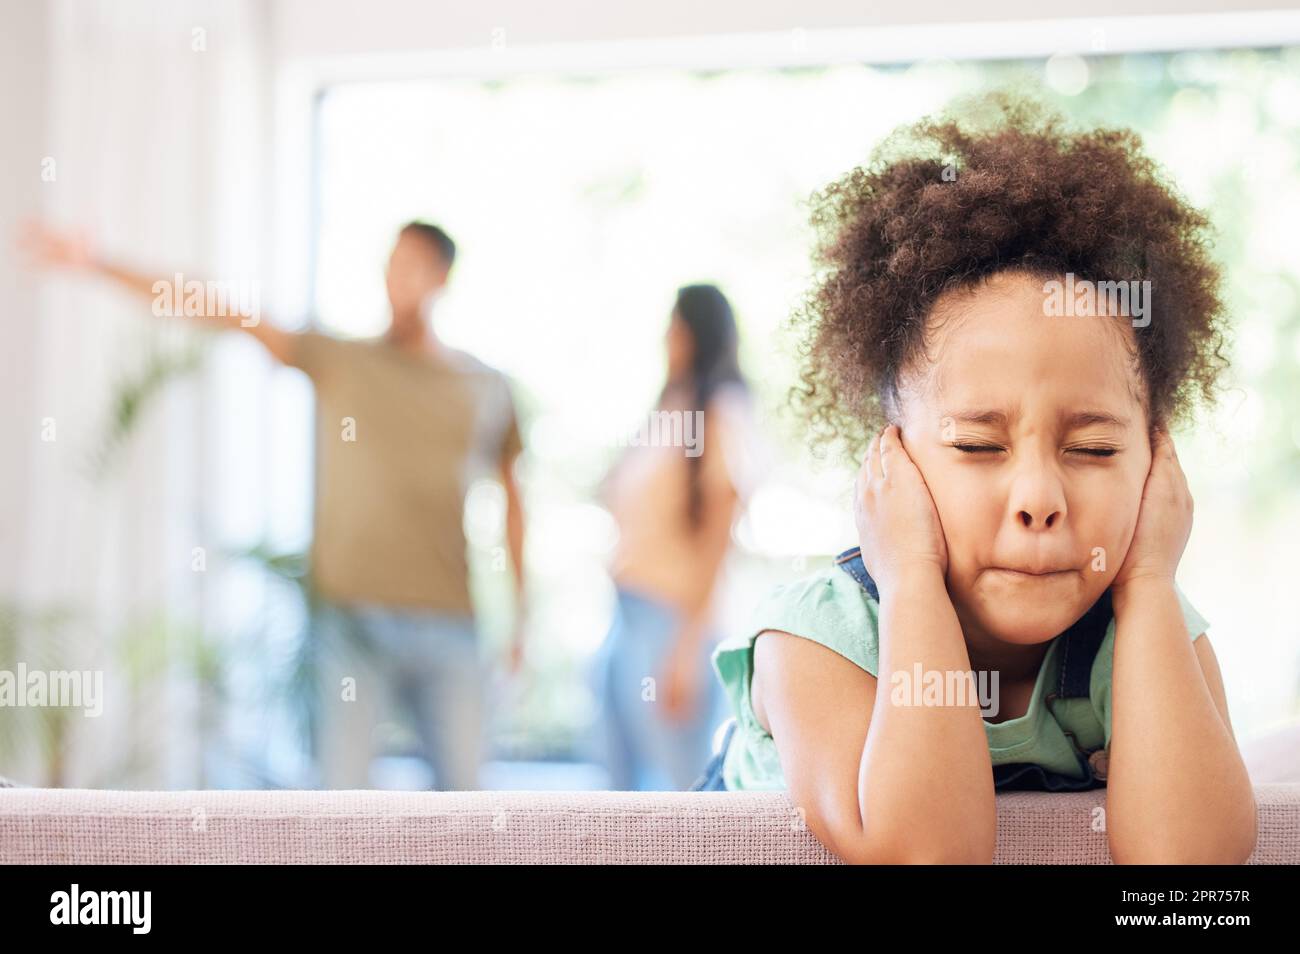 Ive gotten used to blocking them out. Shot of a little girl covering her ears while her parents argue in the background. Stock Photo